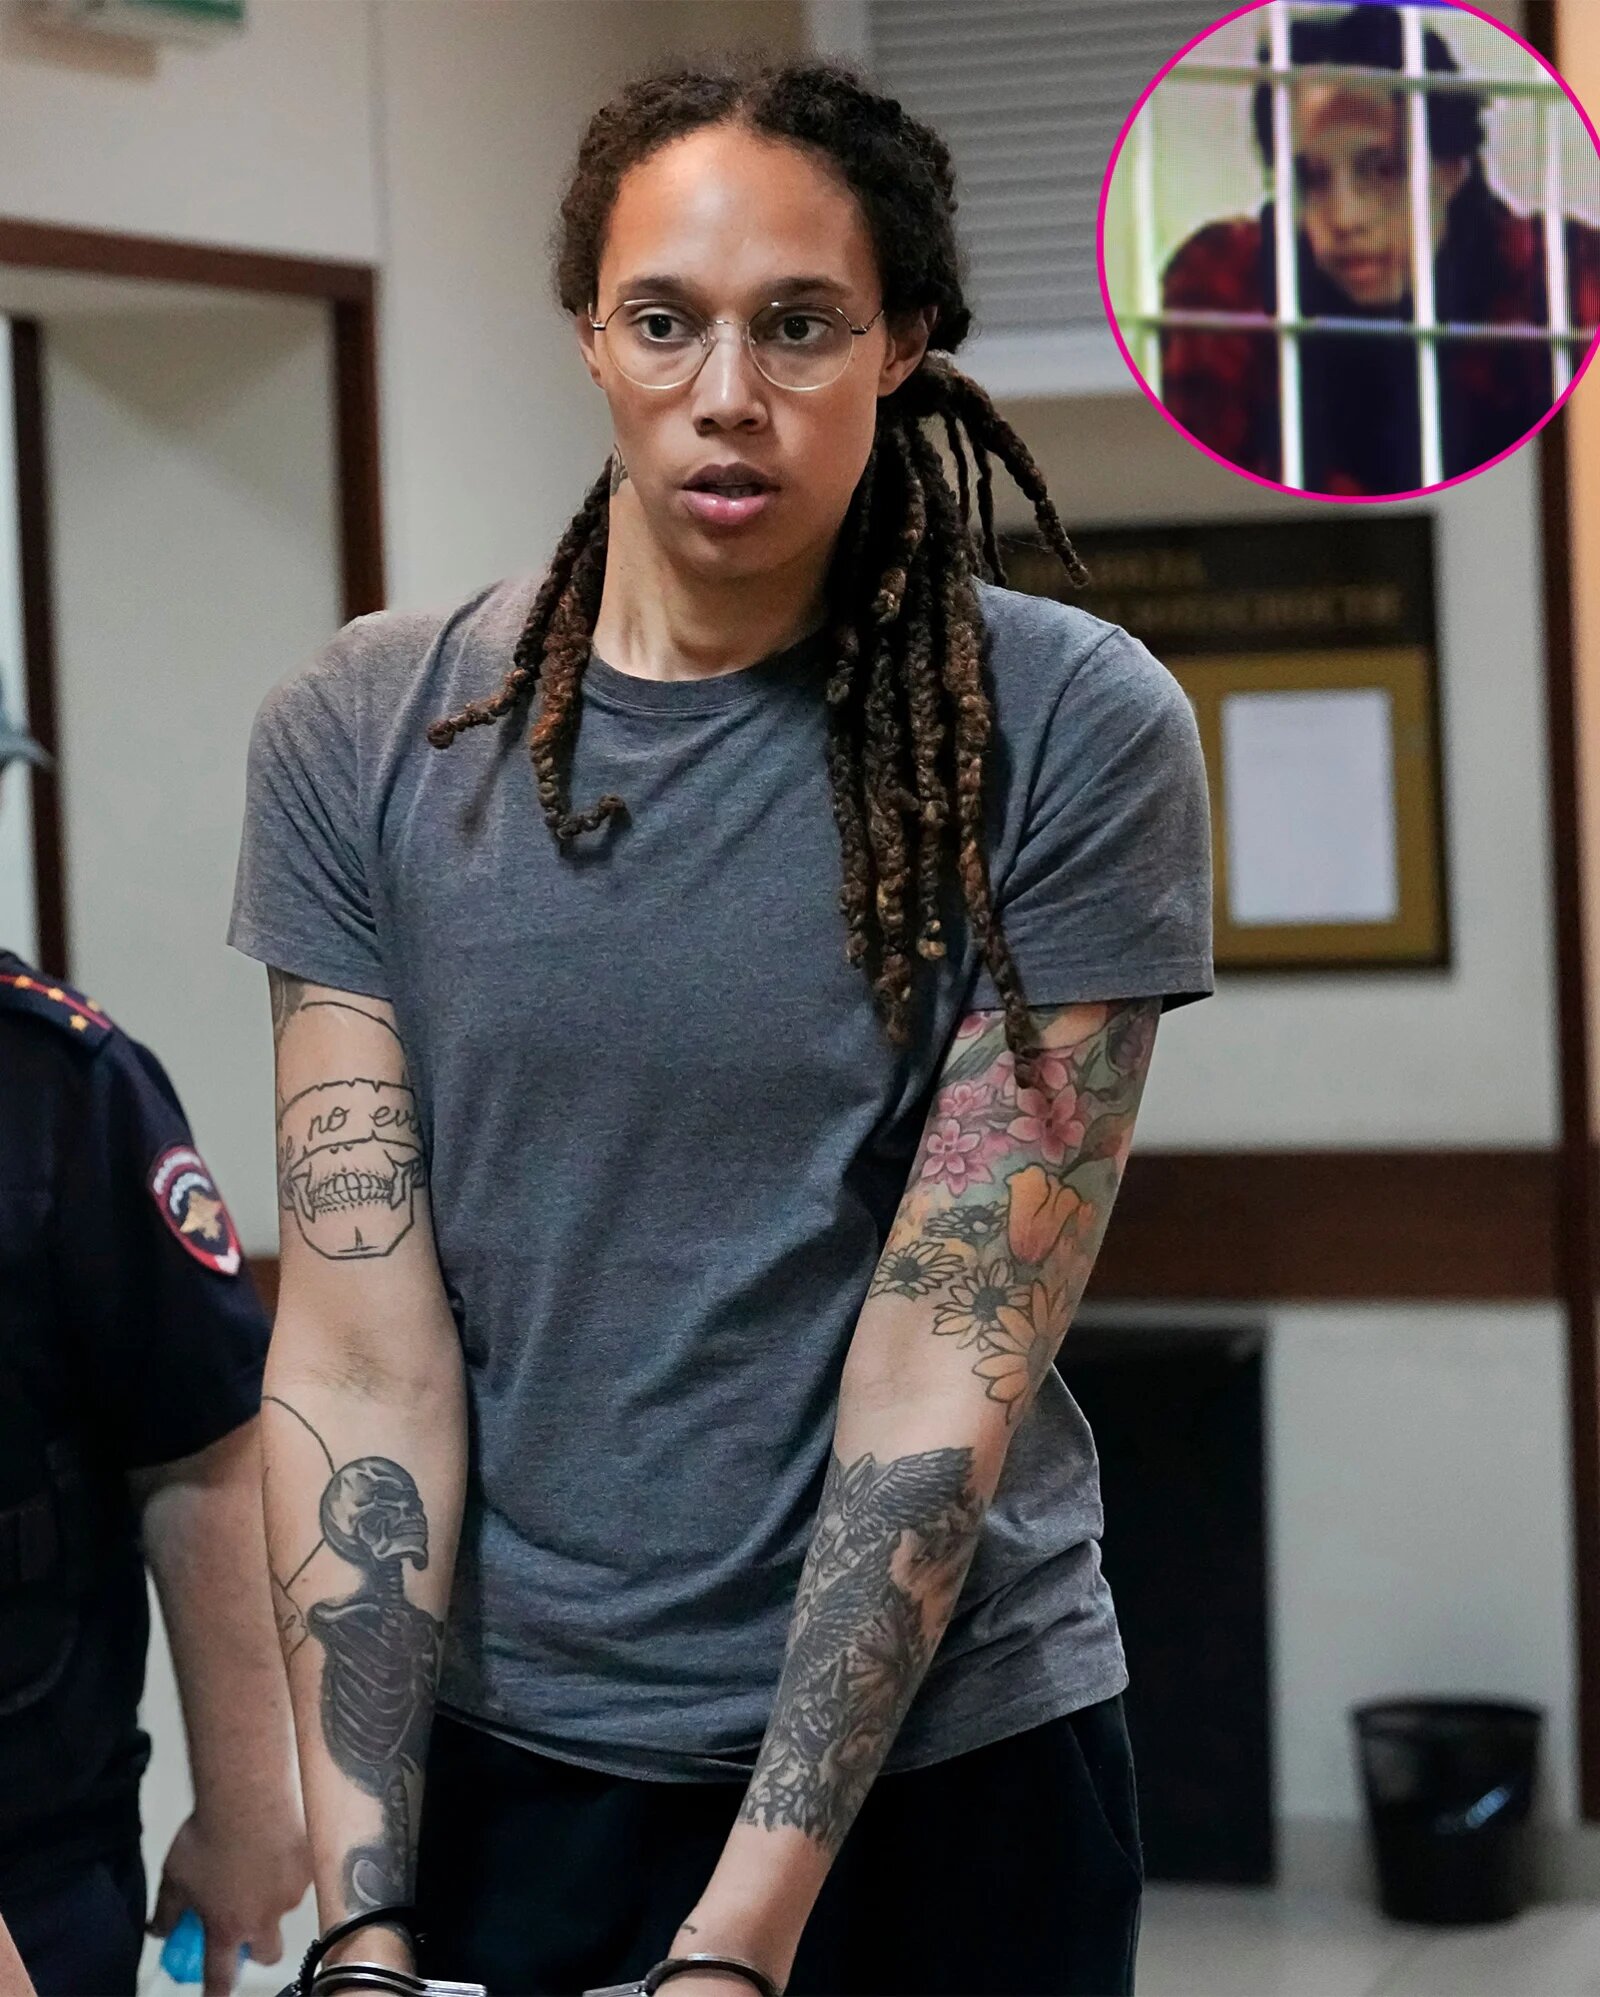 LeBron James Calls for Brittney Griner’s Safe Return: Everything to Know About the WNBA Star’s Detention